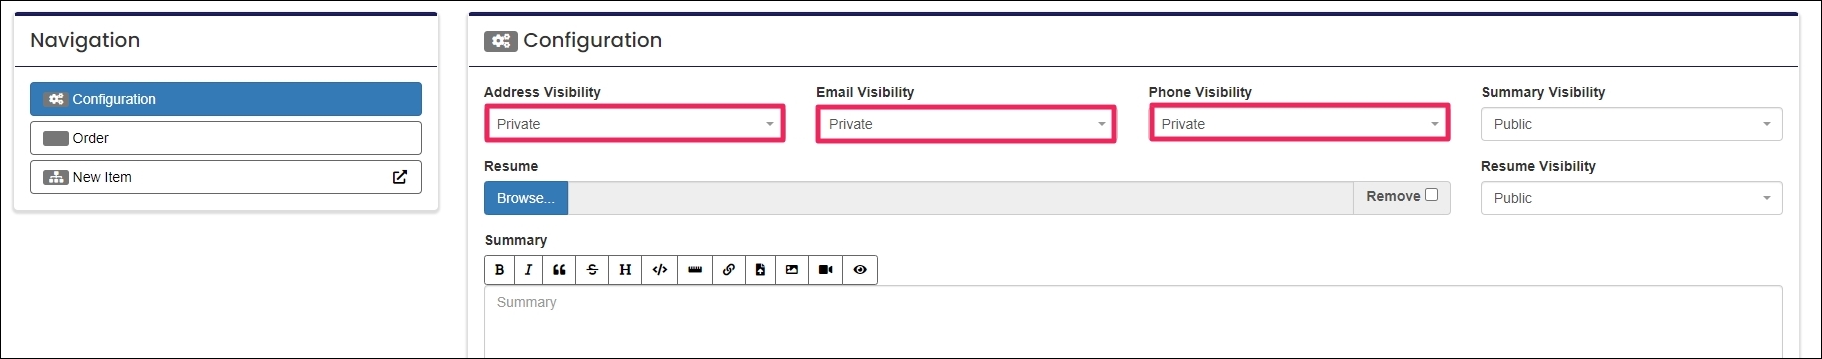 image showing arrows pointing to the various drop-down menus for privacy field settings